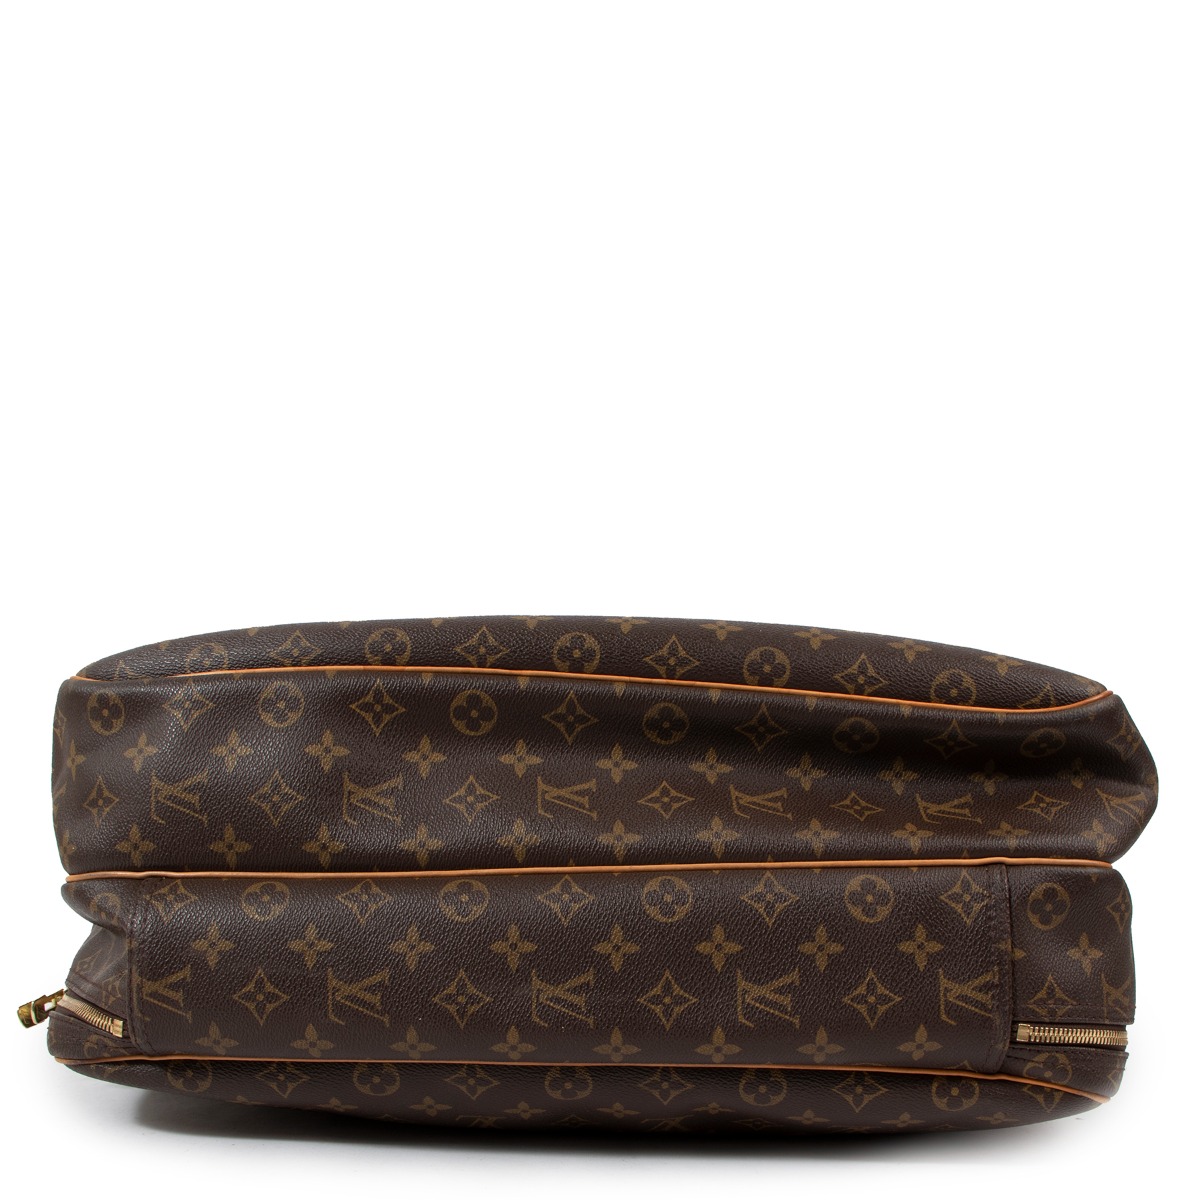 Louis Vuitton Alize Bag, $895, TheRealReal